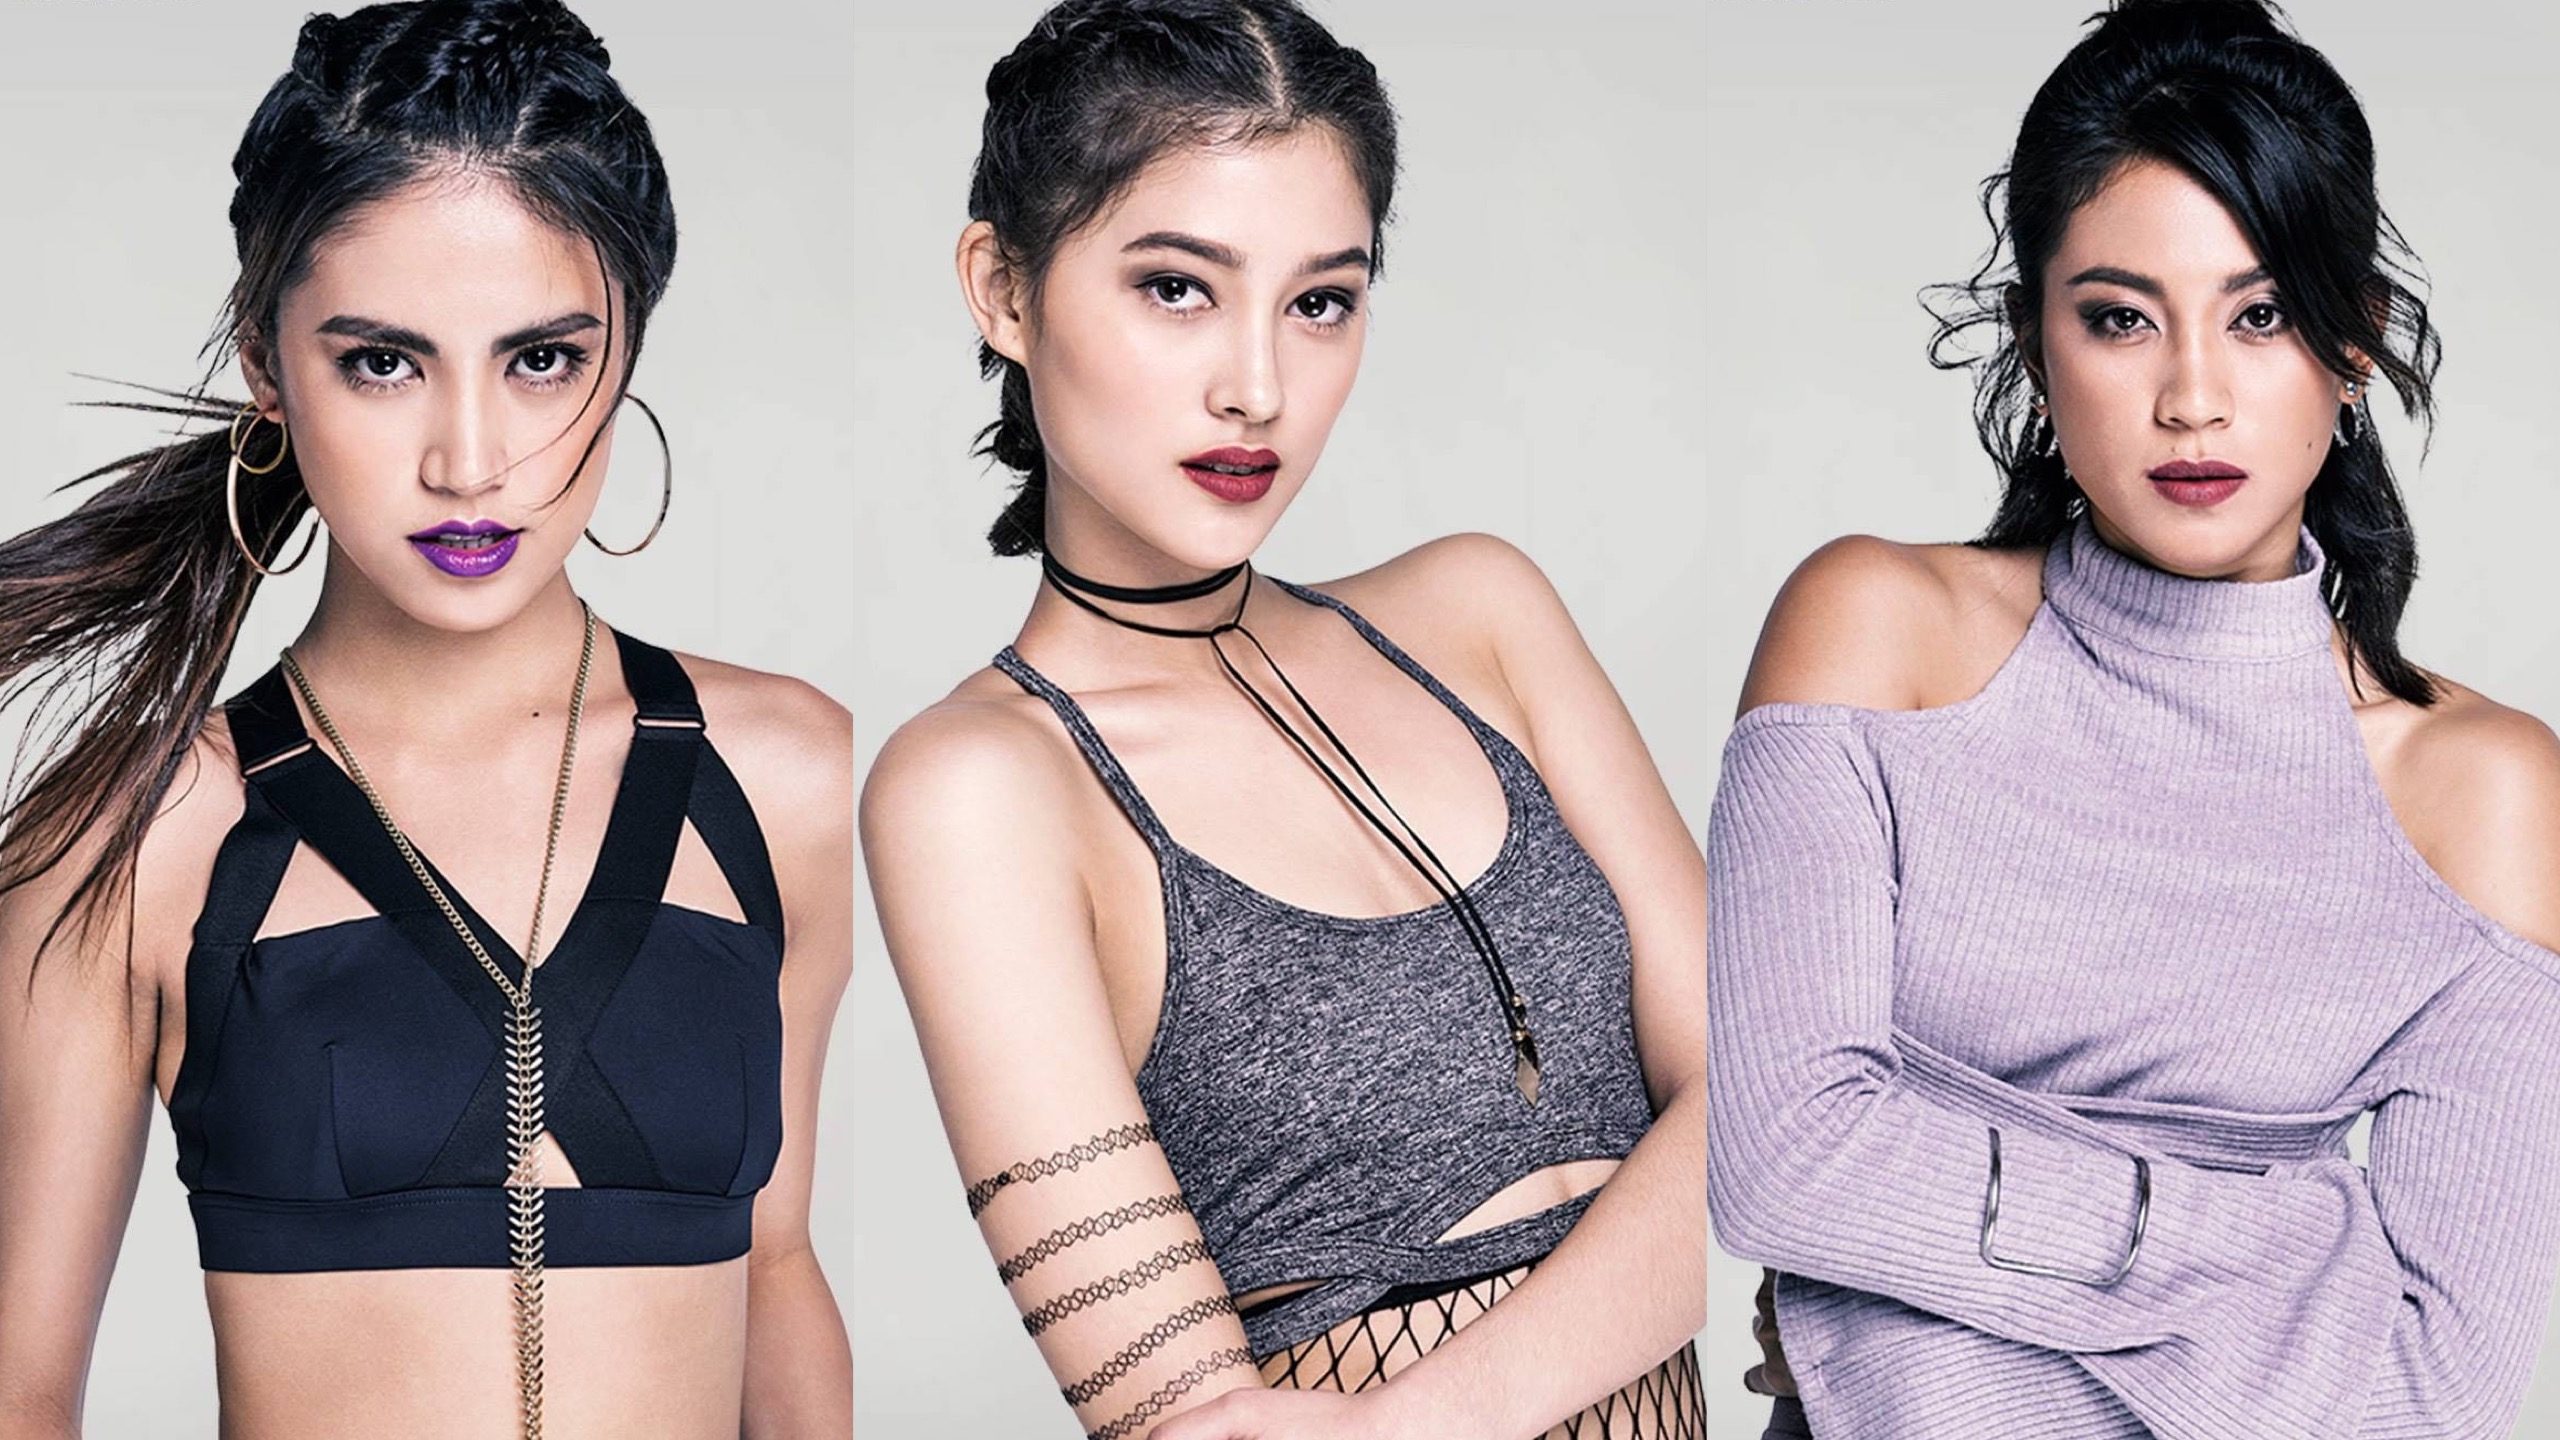 Meet the PH contestants on 'Asia's Next Top Model' cycle 5